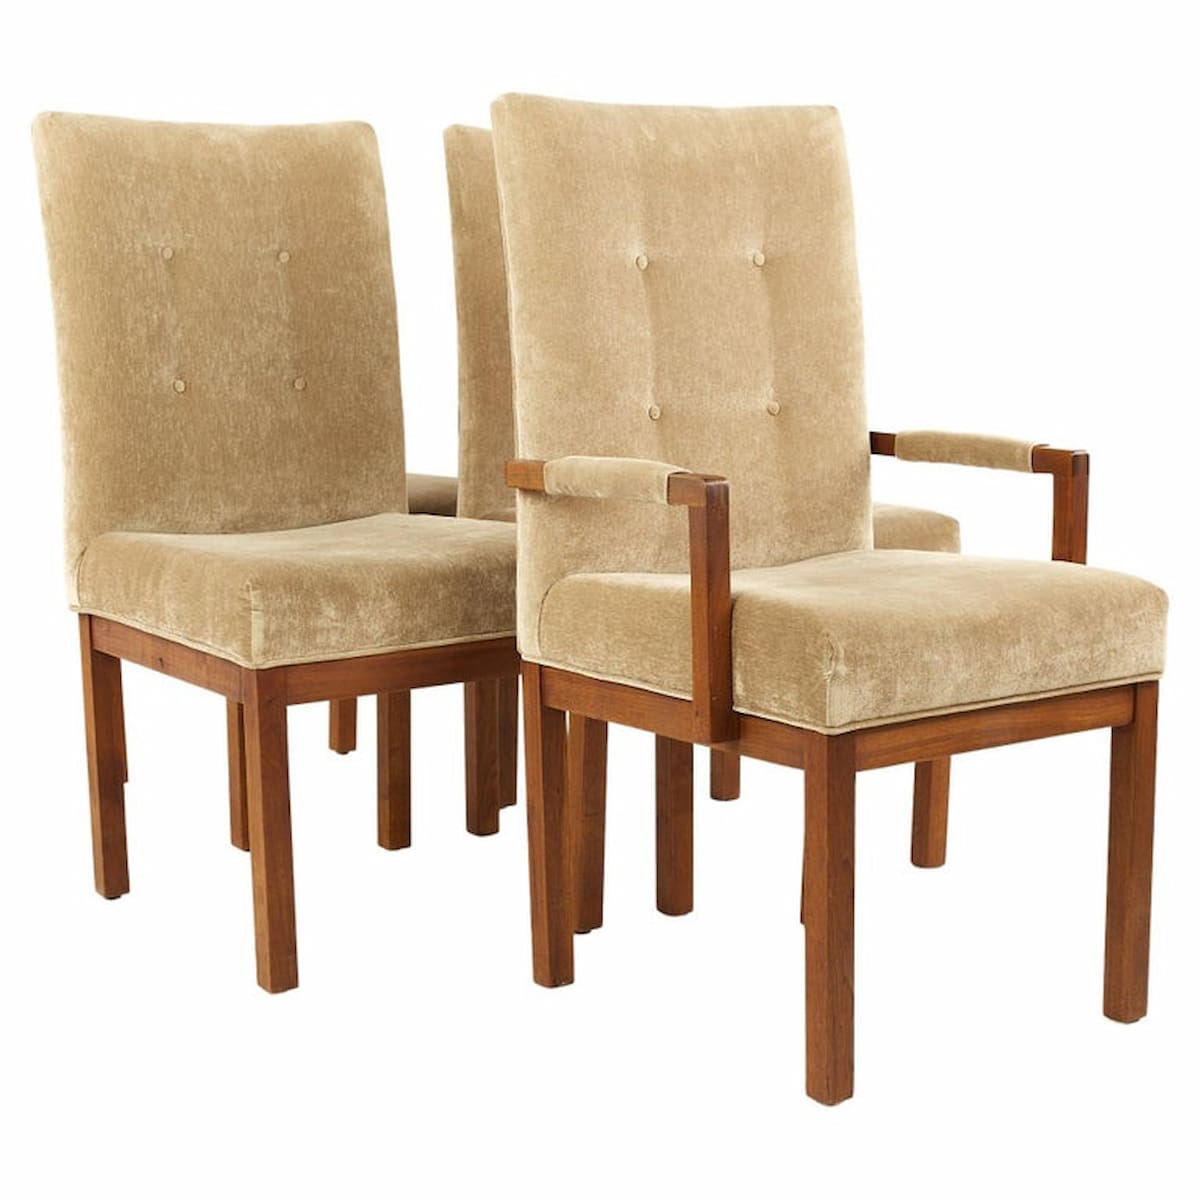 Dillingham Mid Century Walnut Tufted Dining Chairs - Set of 4